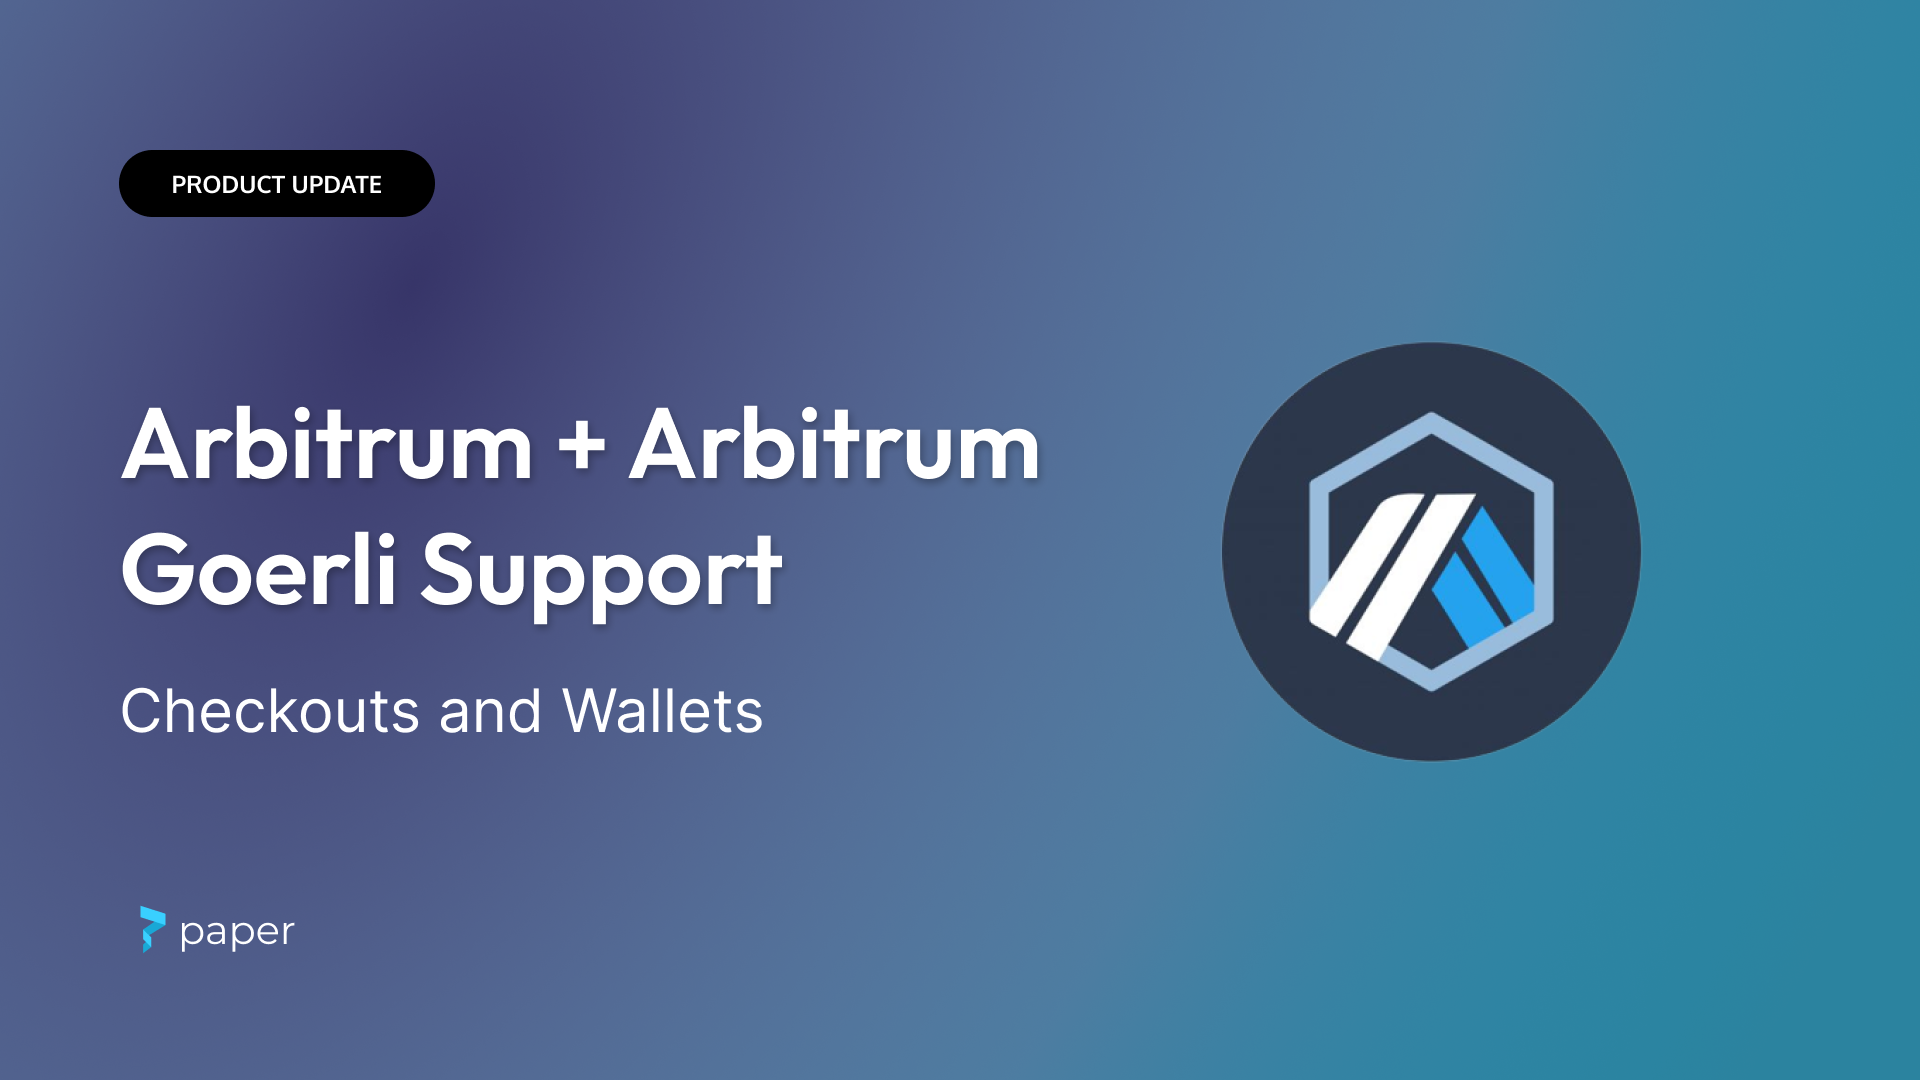 New: Arbitrum + Arbitrum Goerli Support for Checkouts and Wallets